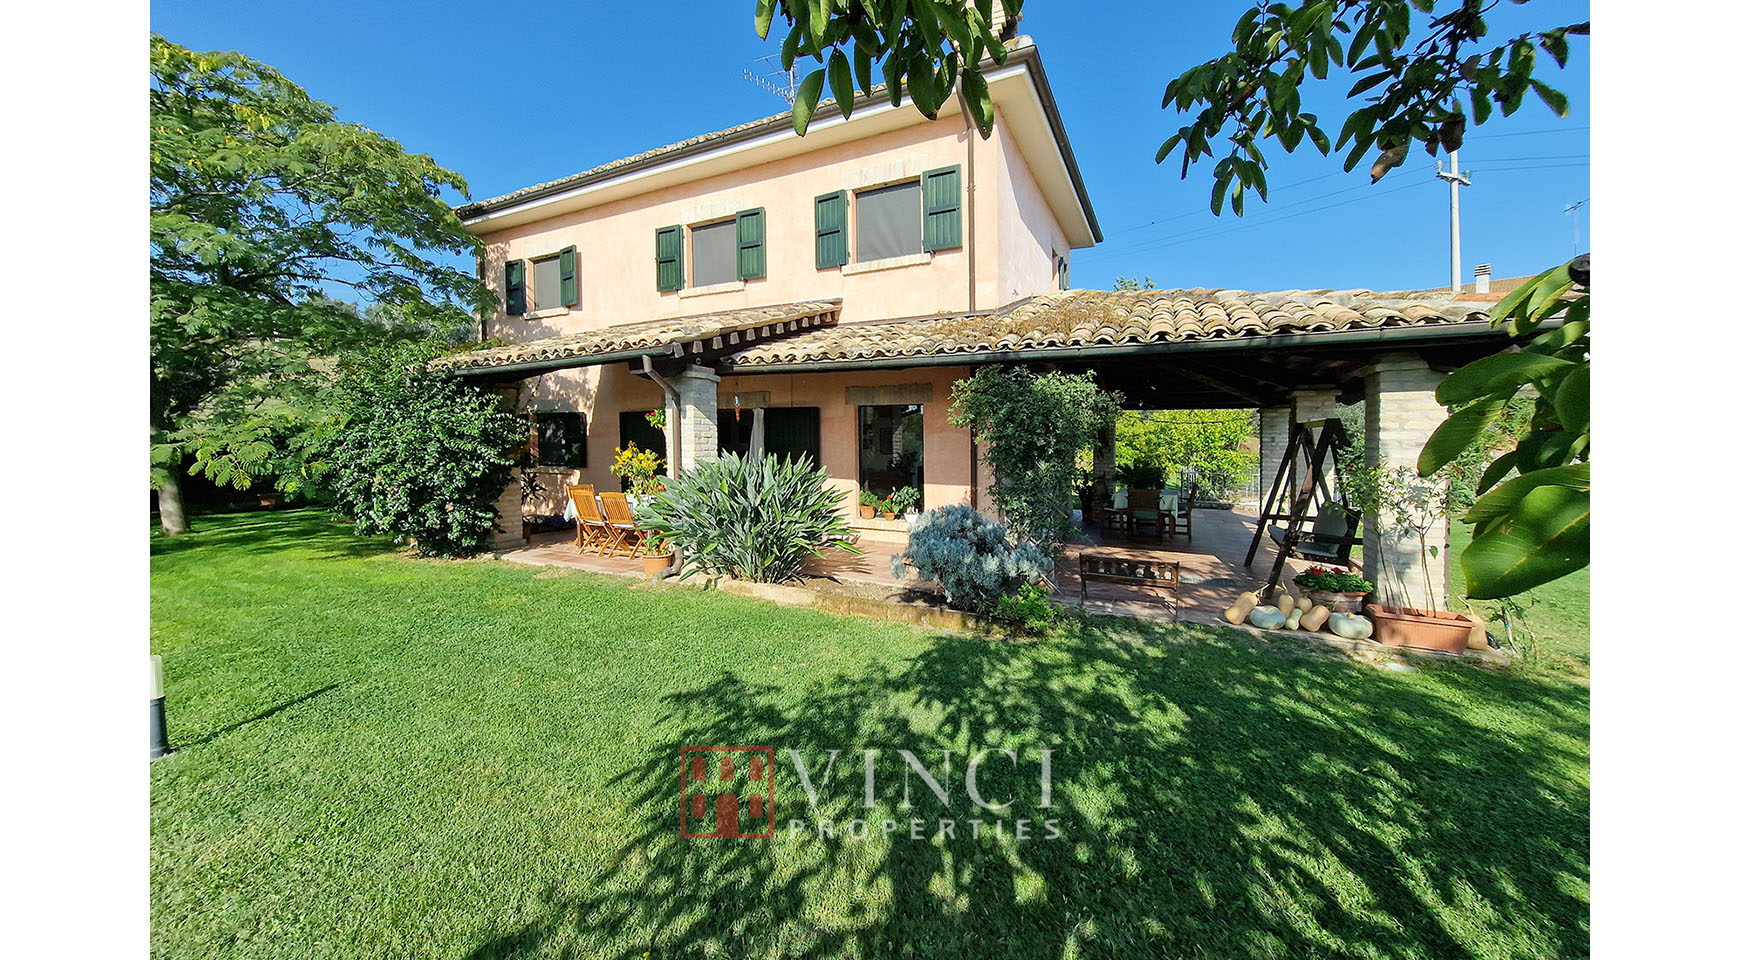 Property for sale in Abruzzo, Italy - Italianhousesforsale